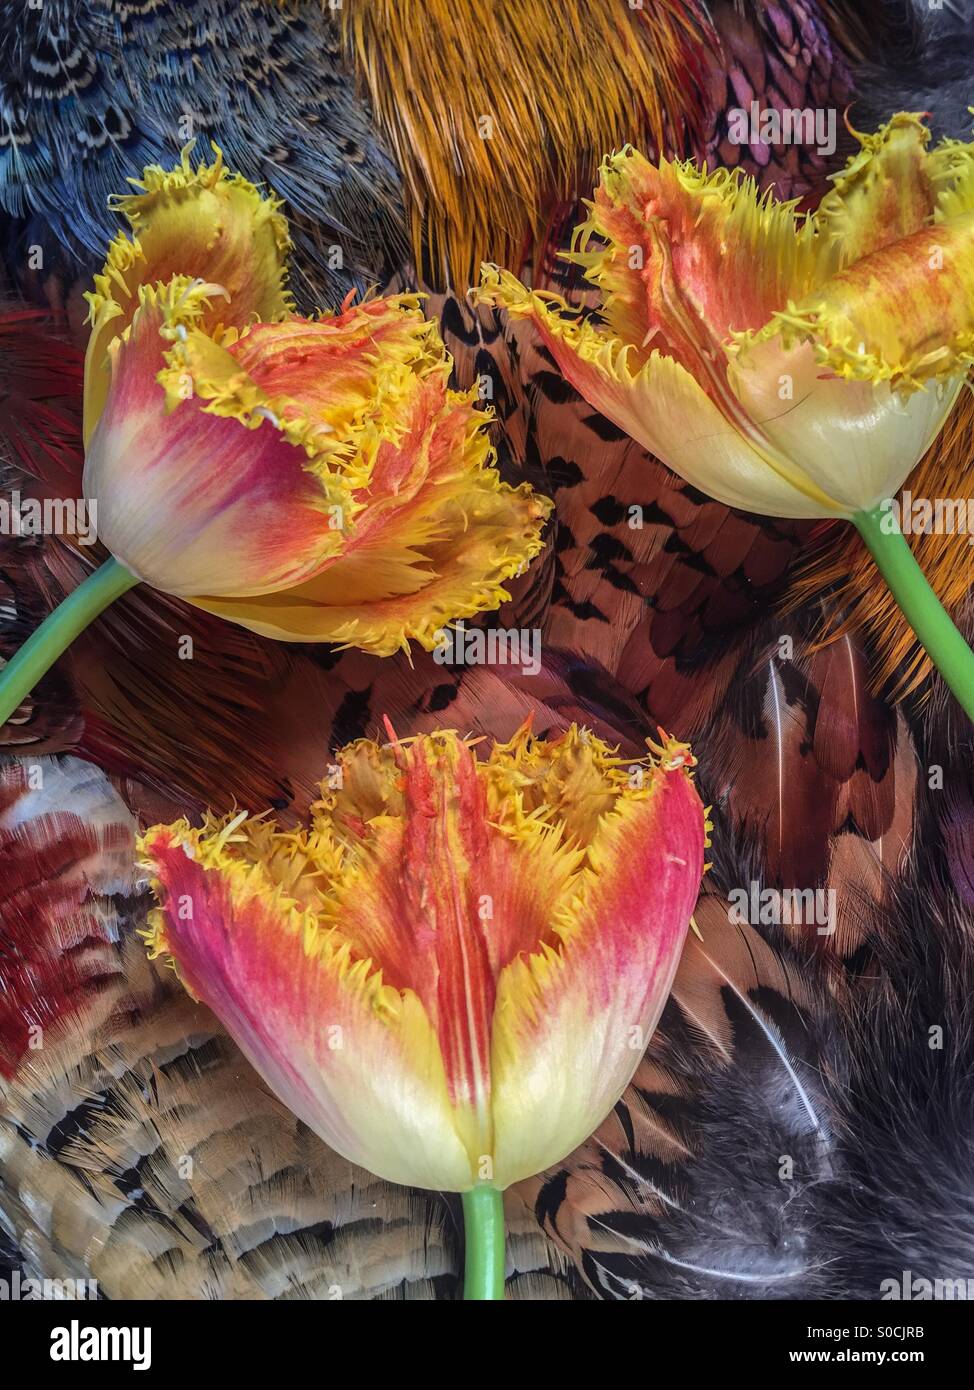 Feathers and tulips Stock Photo